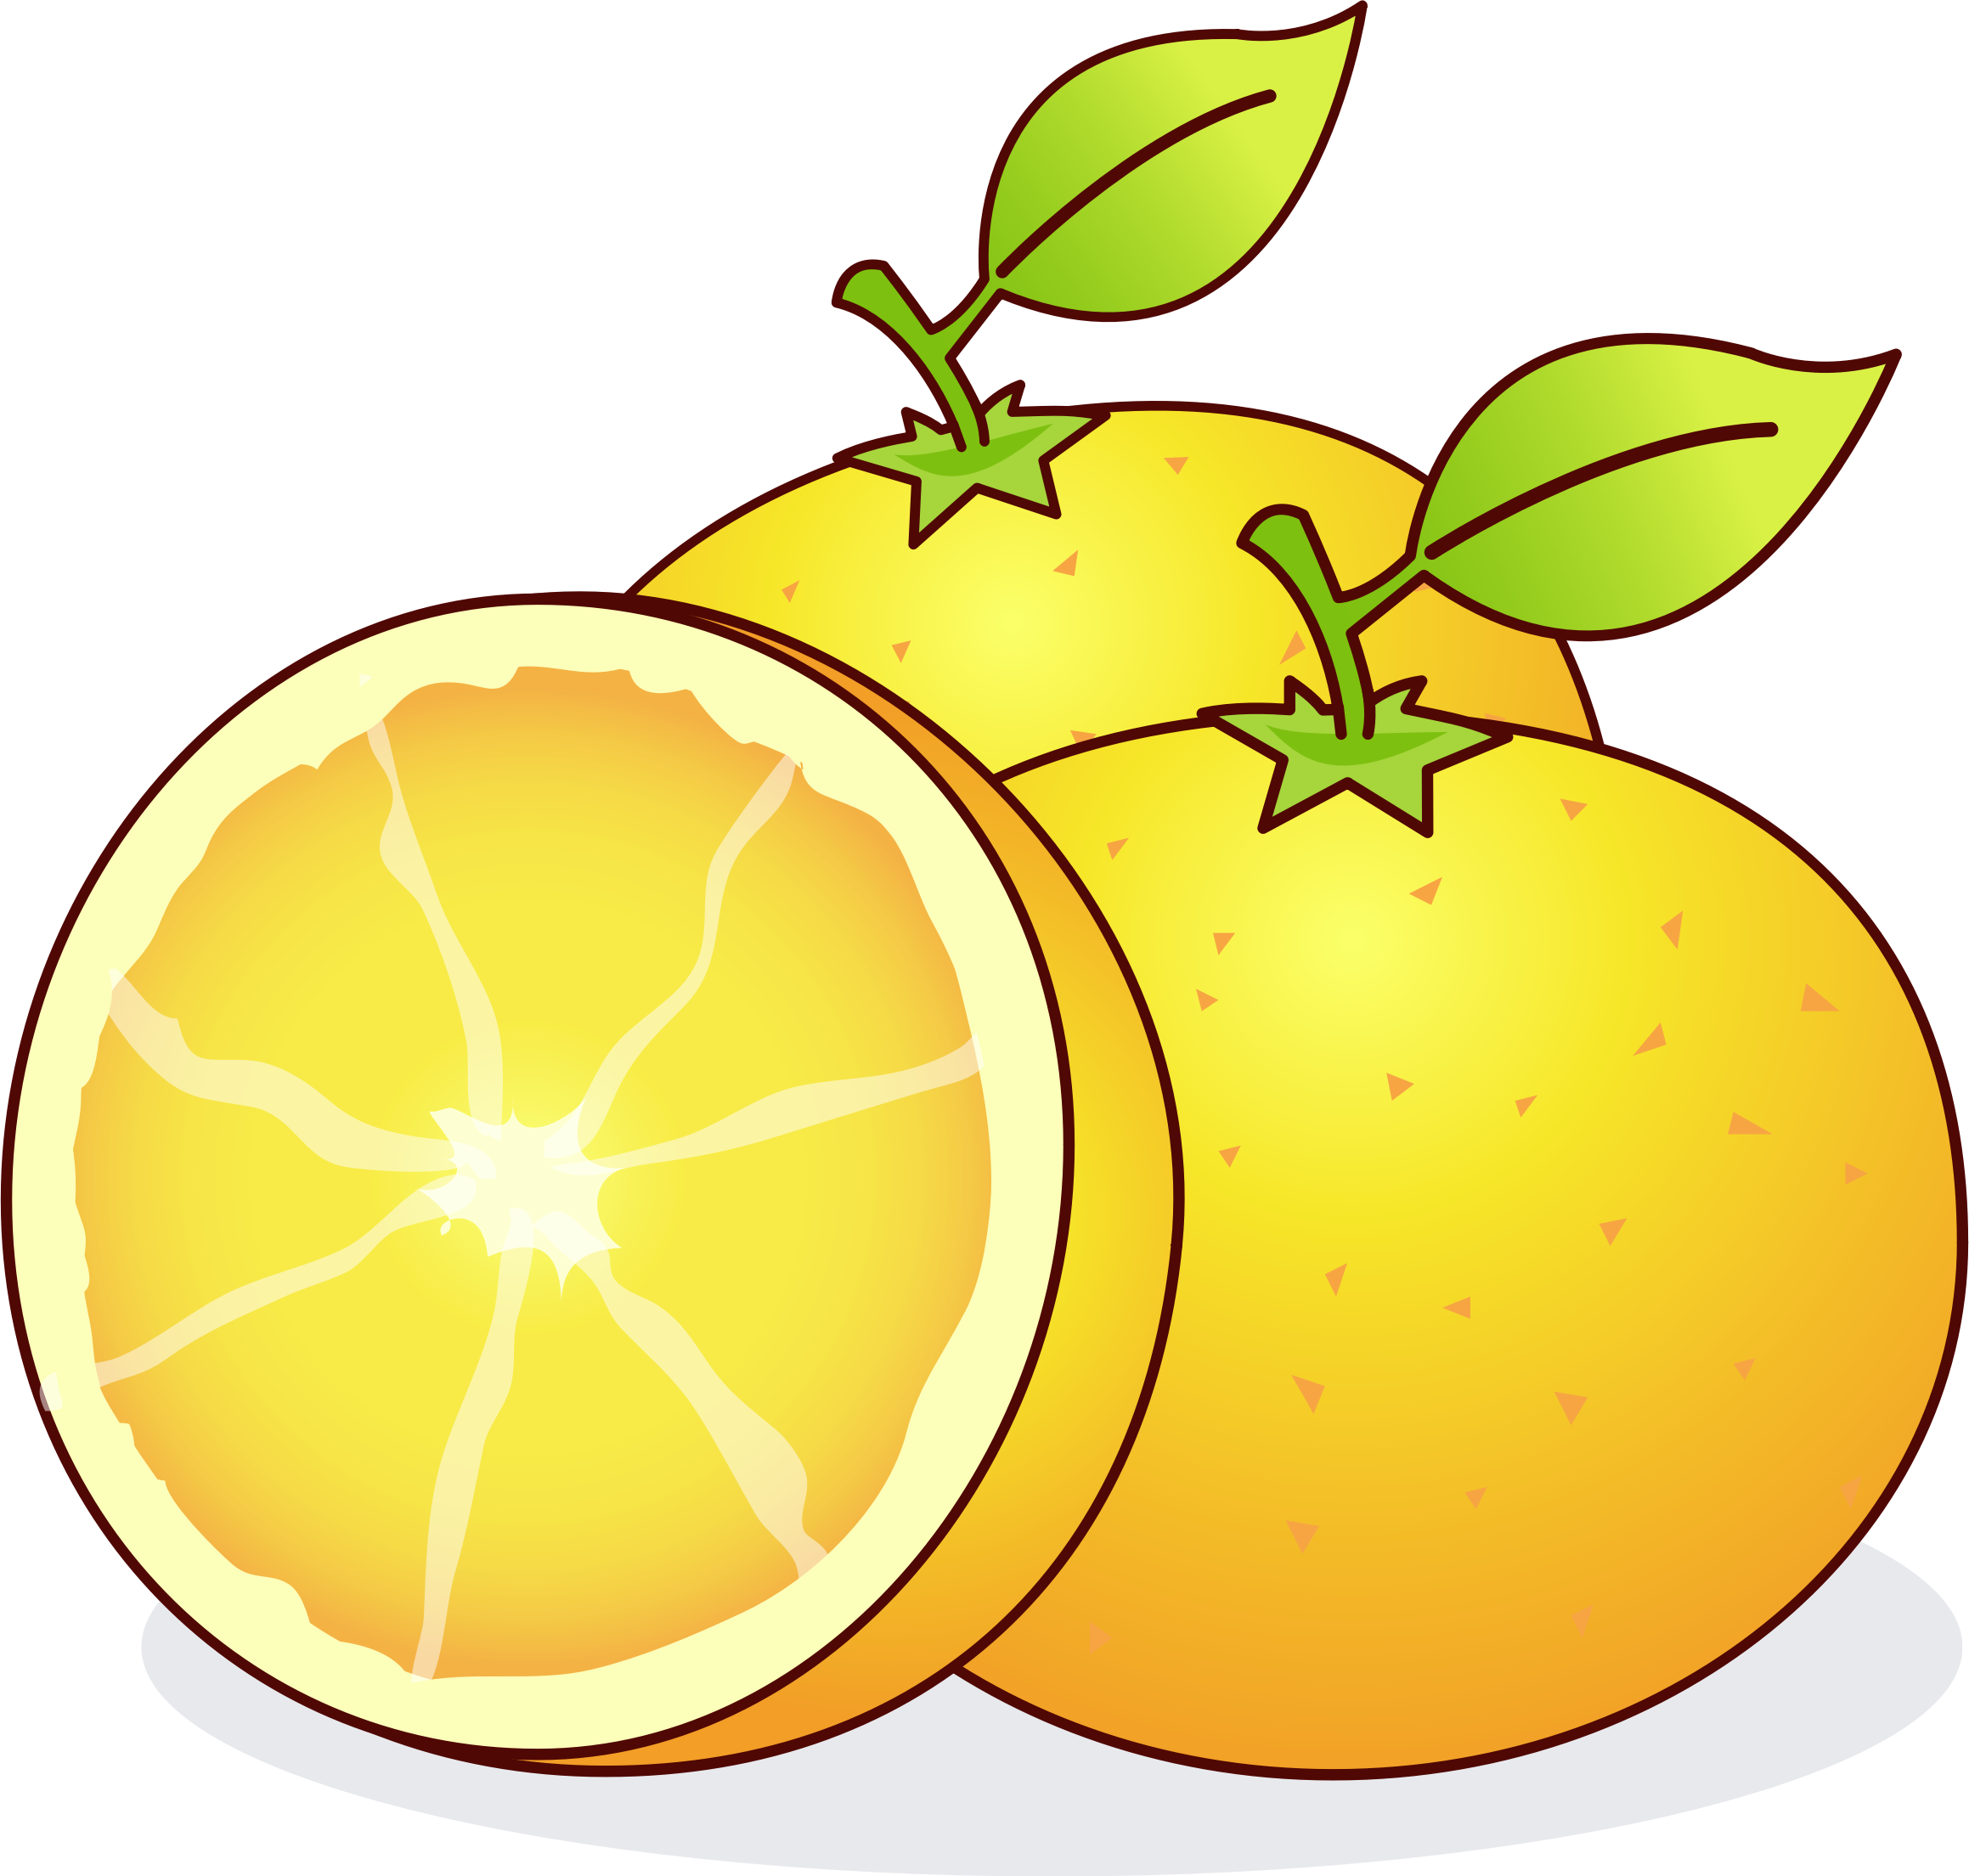 By gdj from pixabay. Oranges clipart lemons